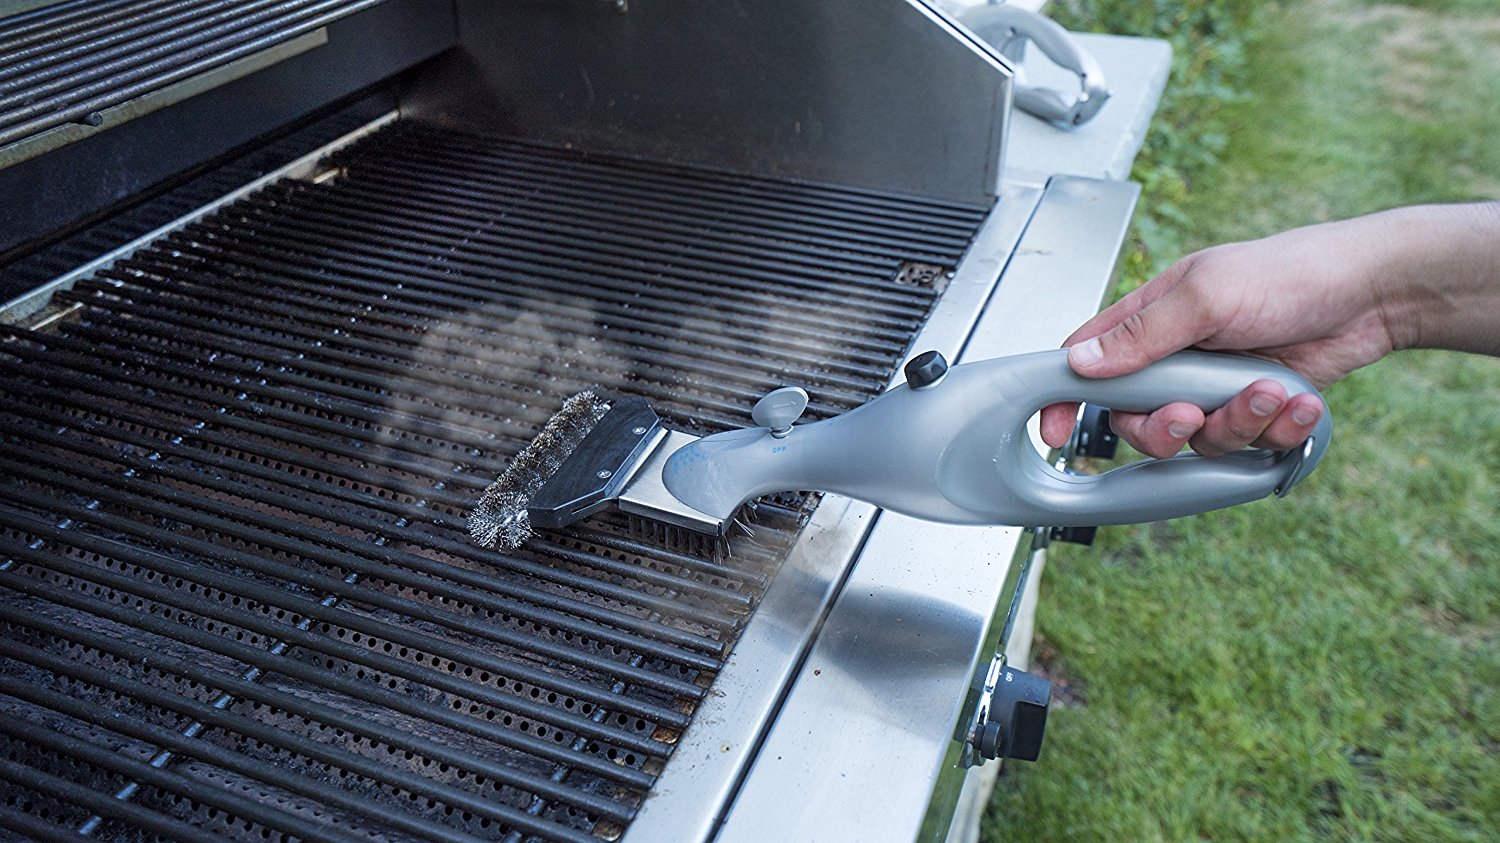 https://couponcravings.com/wp-content/uploads/2017/11/Grill-Daddy-Steam-BBQ-Grill-Brush-Cleaner.jpg